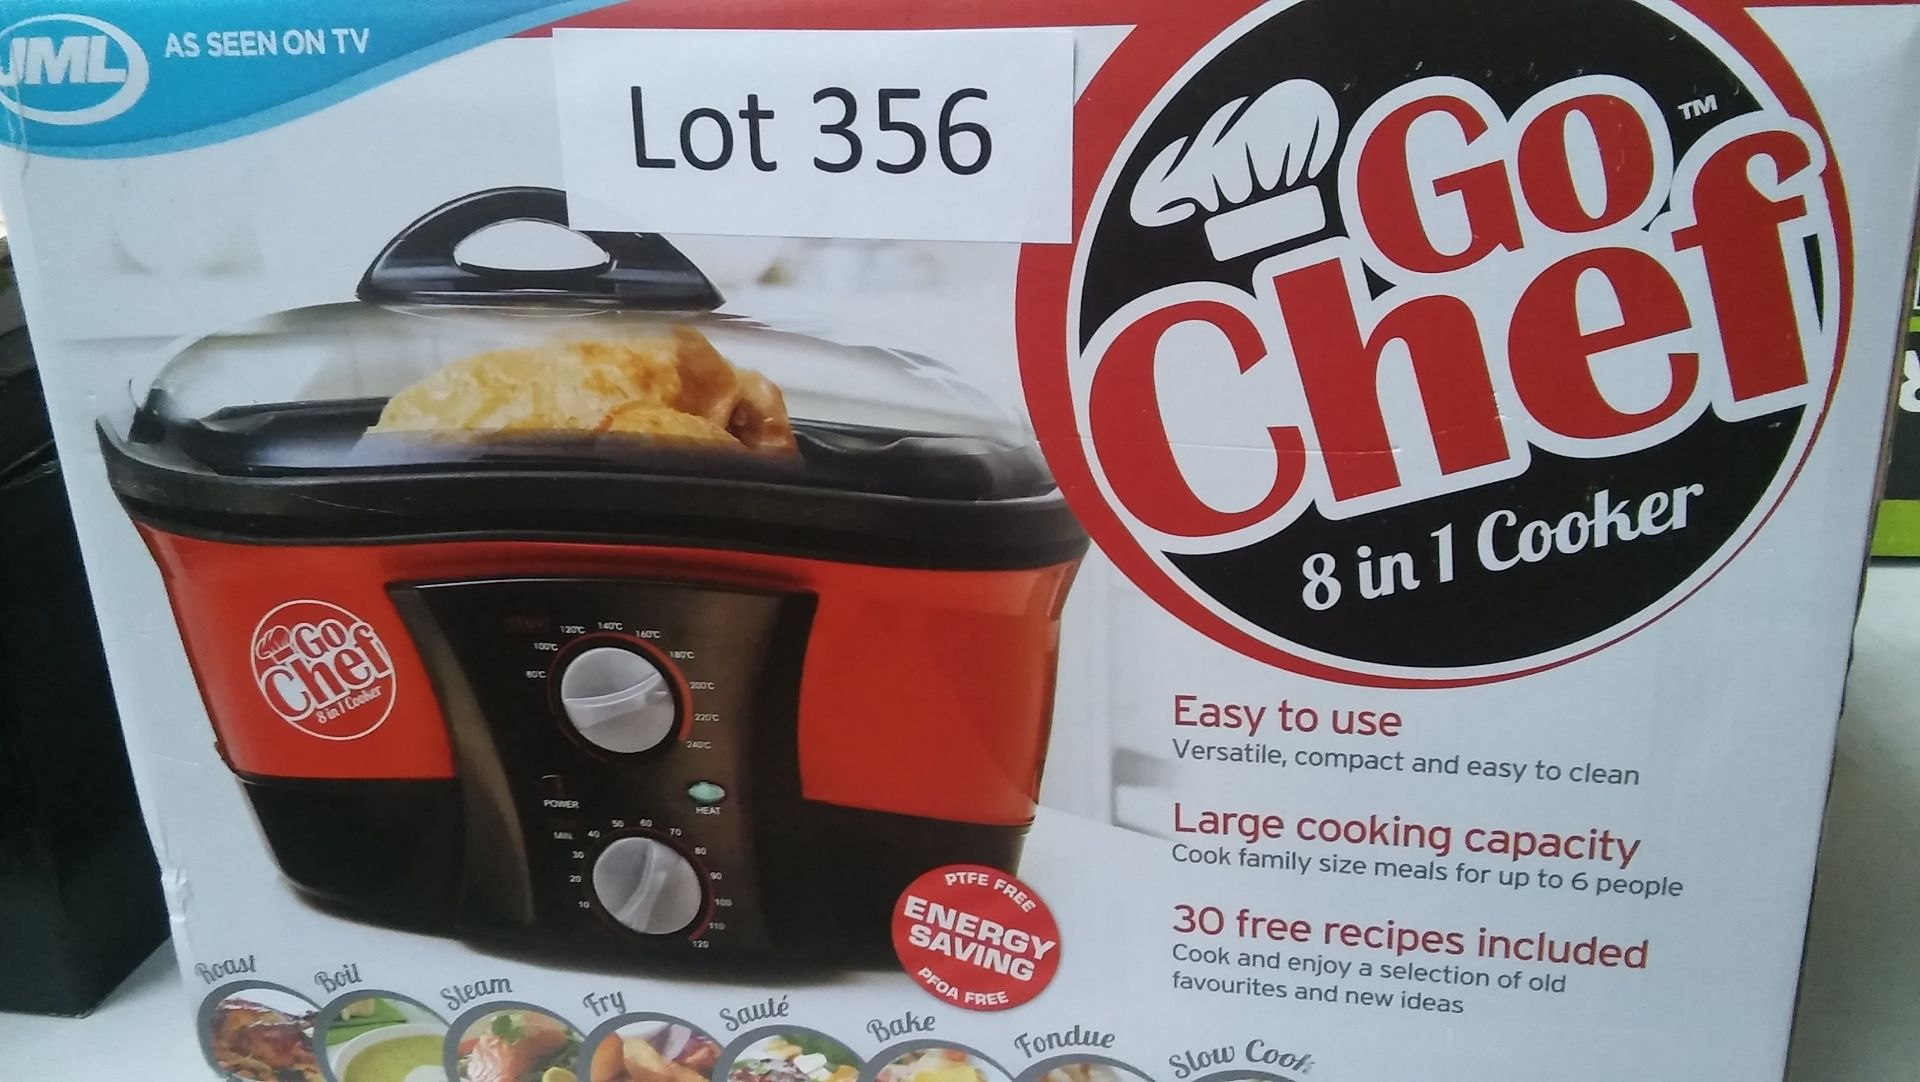 "Go Chef" 8 in 1 cooker.As new.